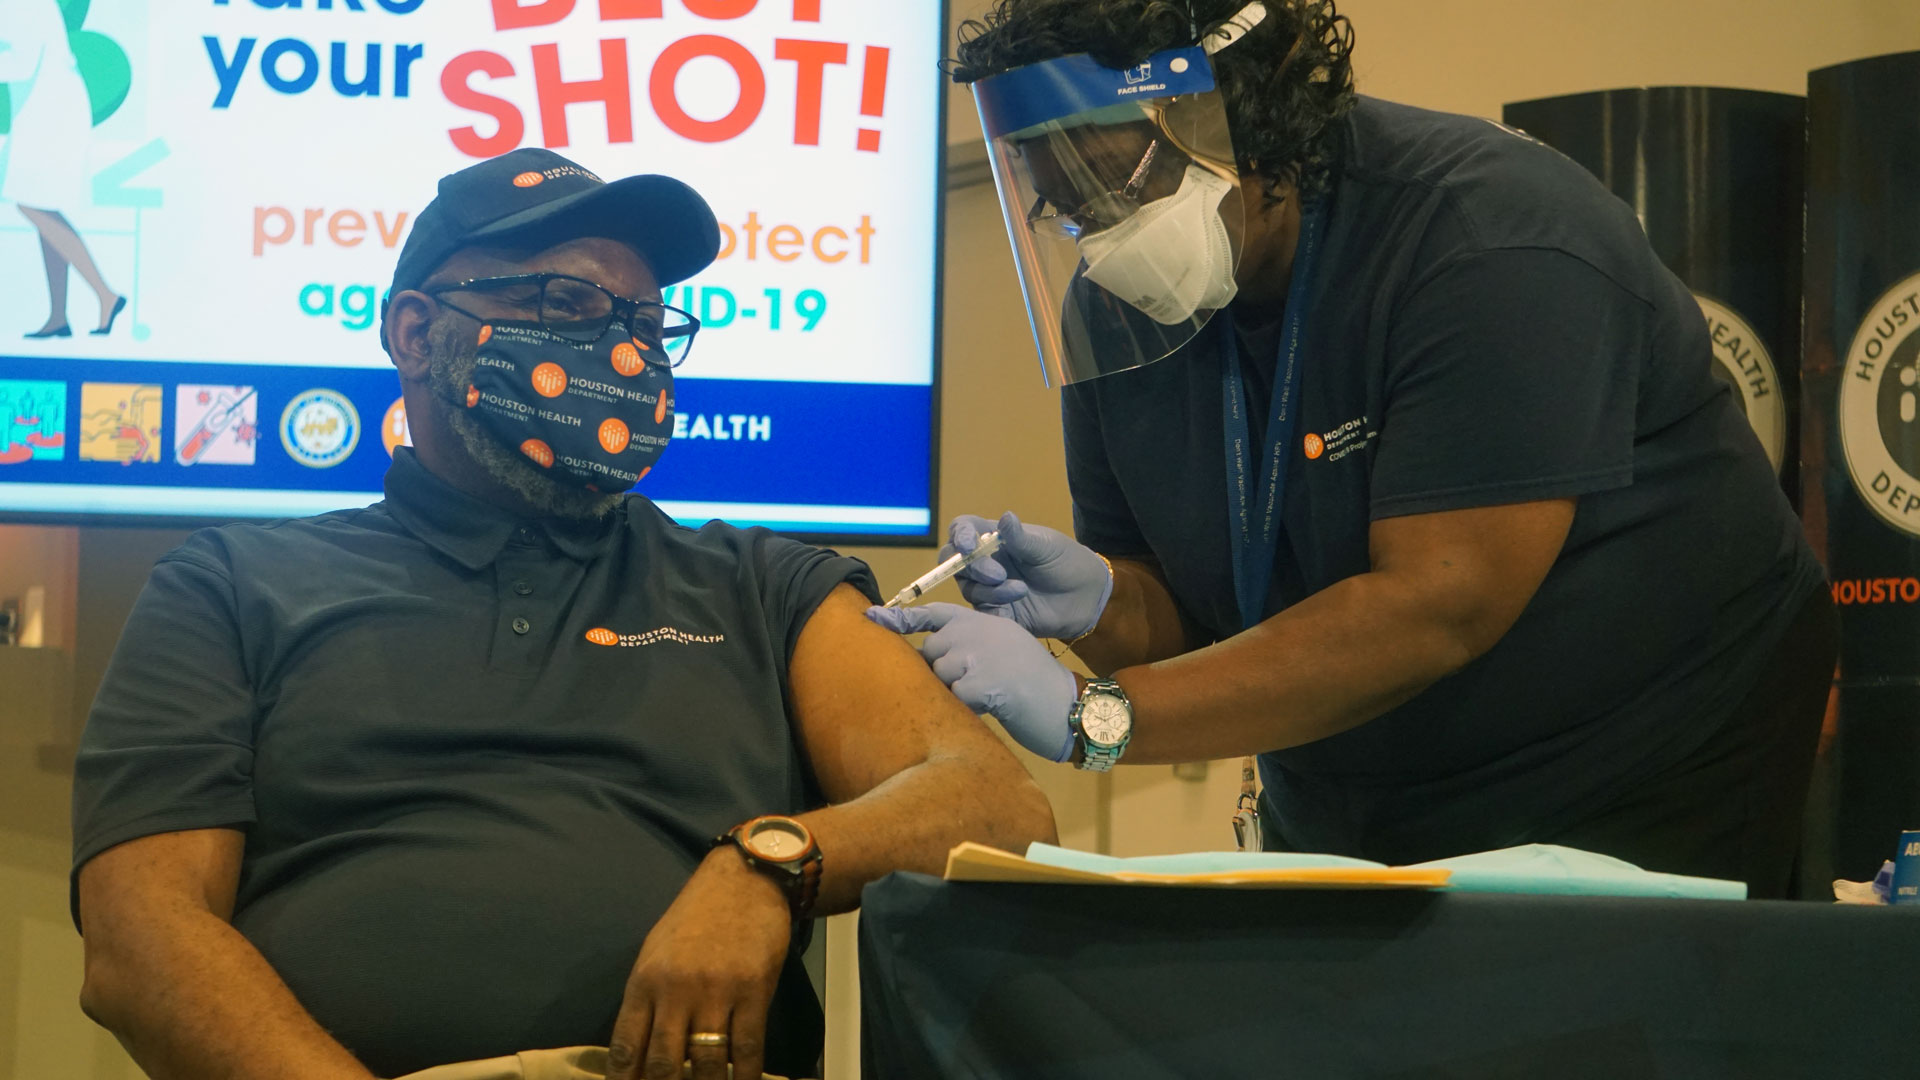 Image of person getting COVID-19 vaccination.